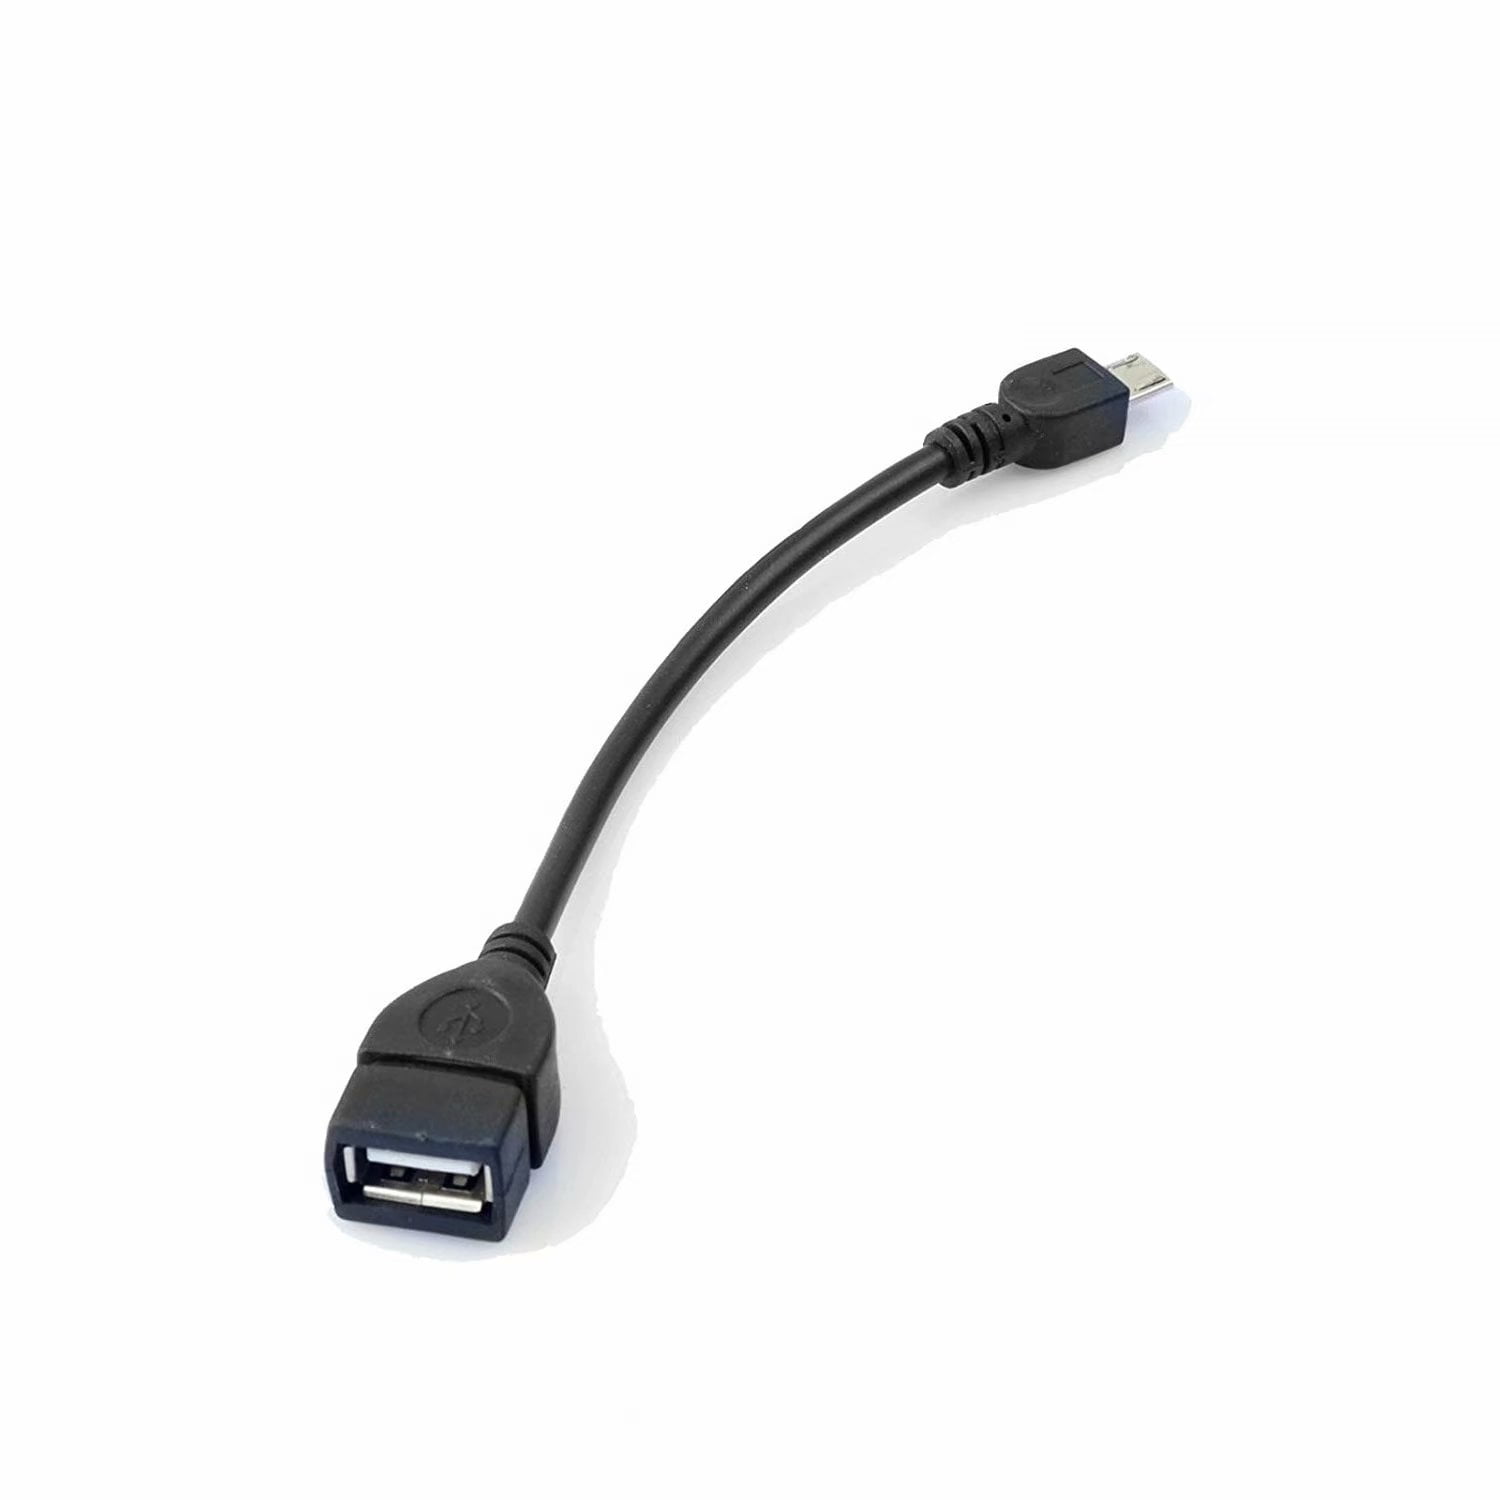 Micro-USB to USB 2.0 Right Angle Adapter works for HTC Ville is High Speed Data-Transfer Cable for connecting any compatible USB Accessory/Device/Drive/Flash/ and truly On-The-Go! Black OTG 